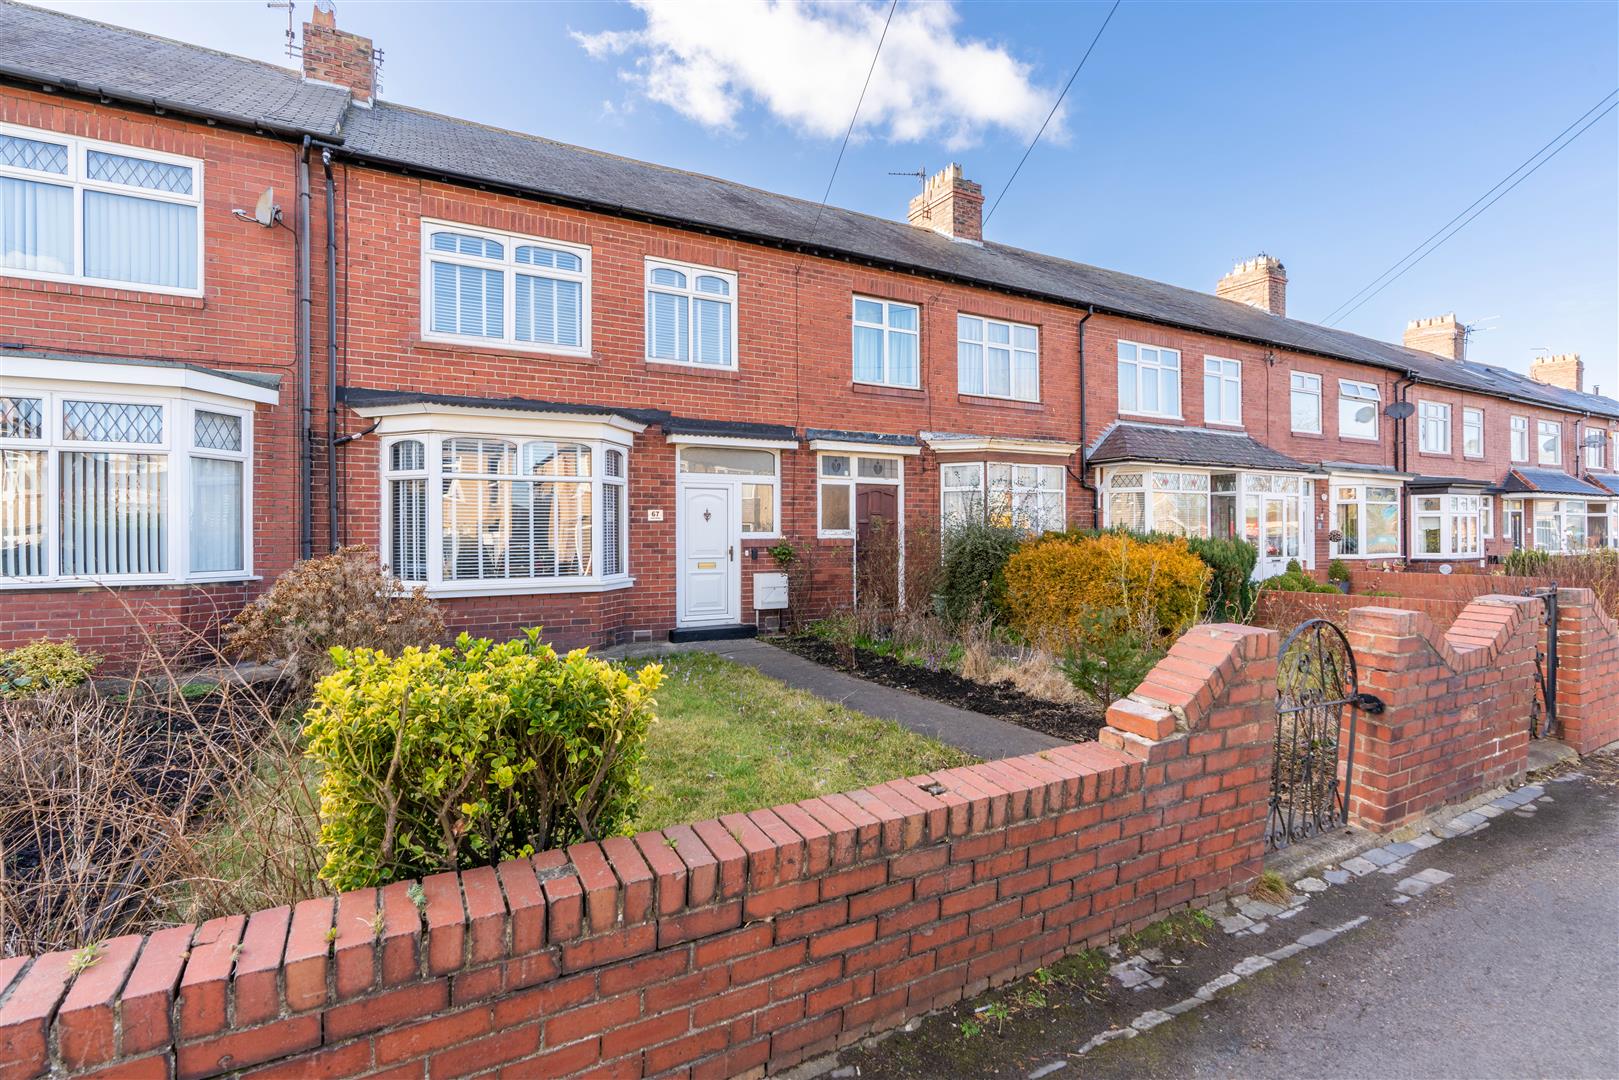 3 bed terraced house for sale in East View, Wideopen, NE13